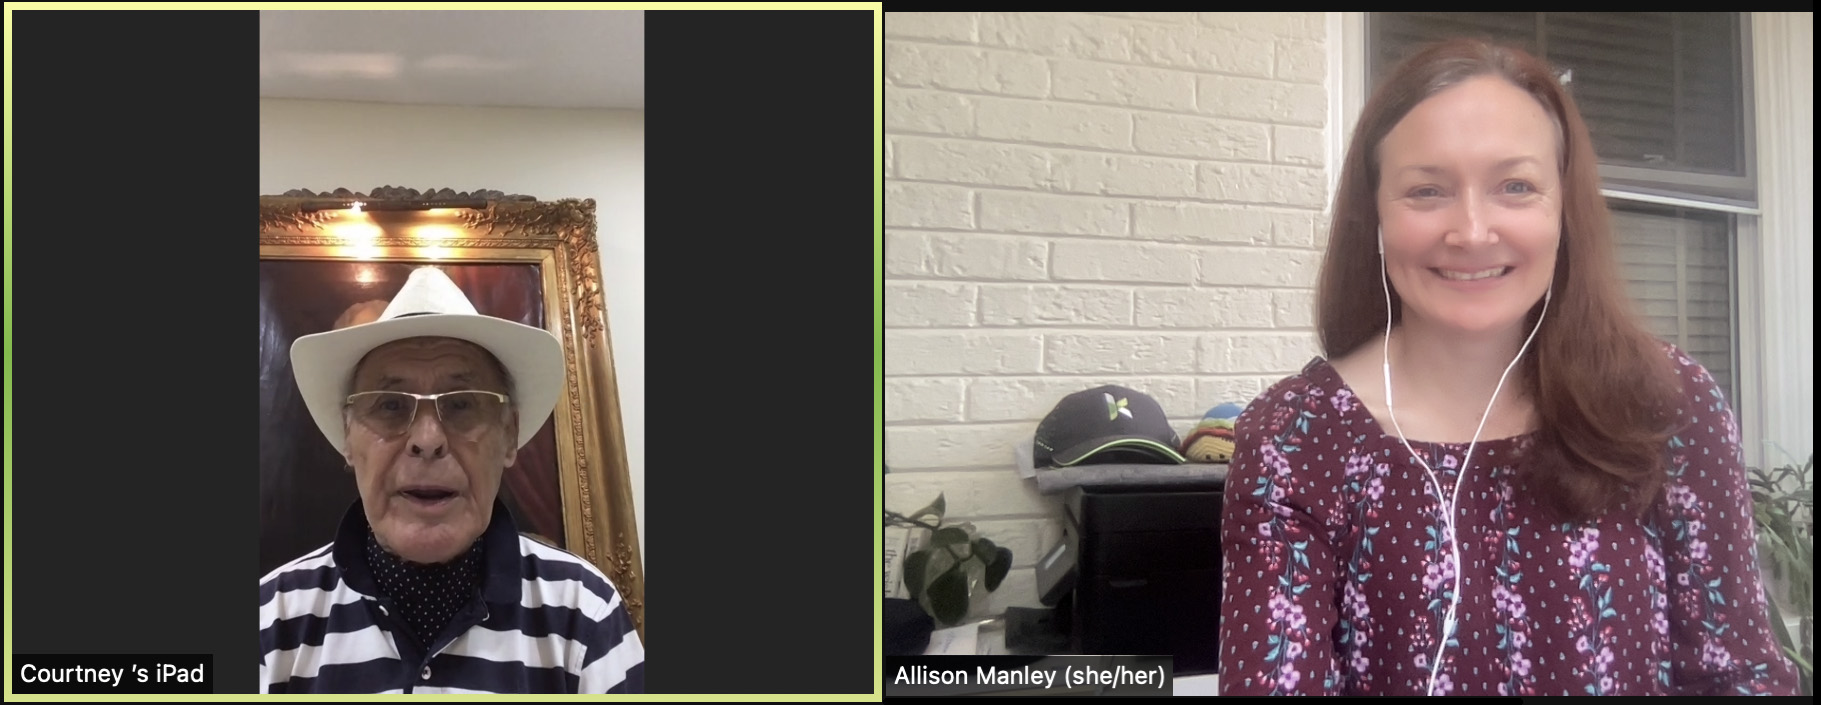 Zoom call with Courtney Jones and Allison Manley